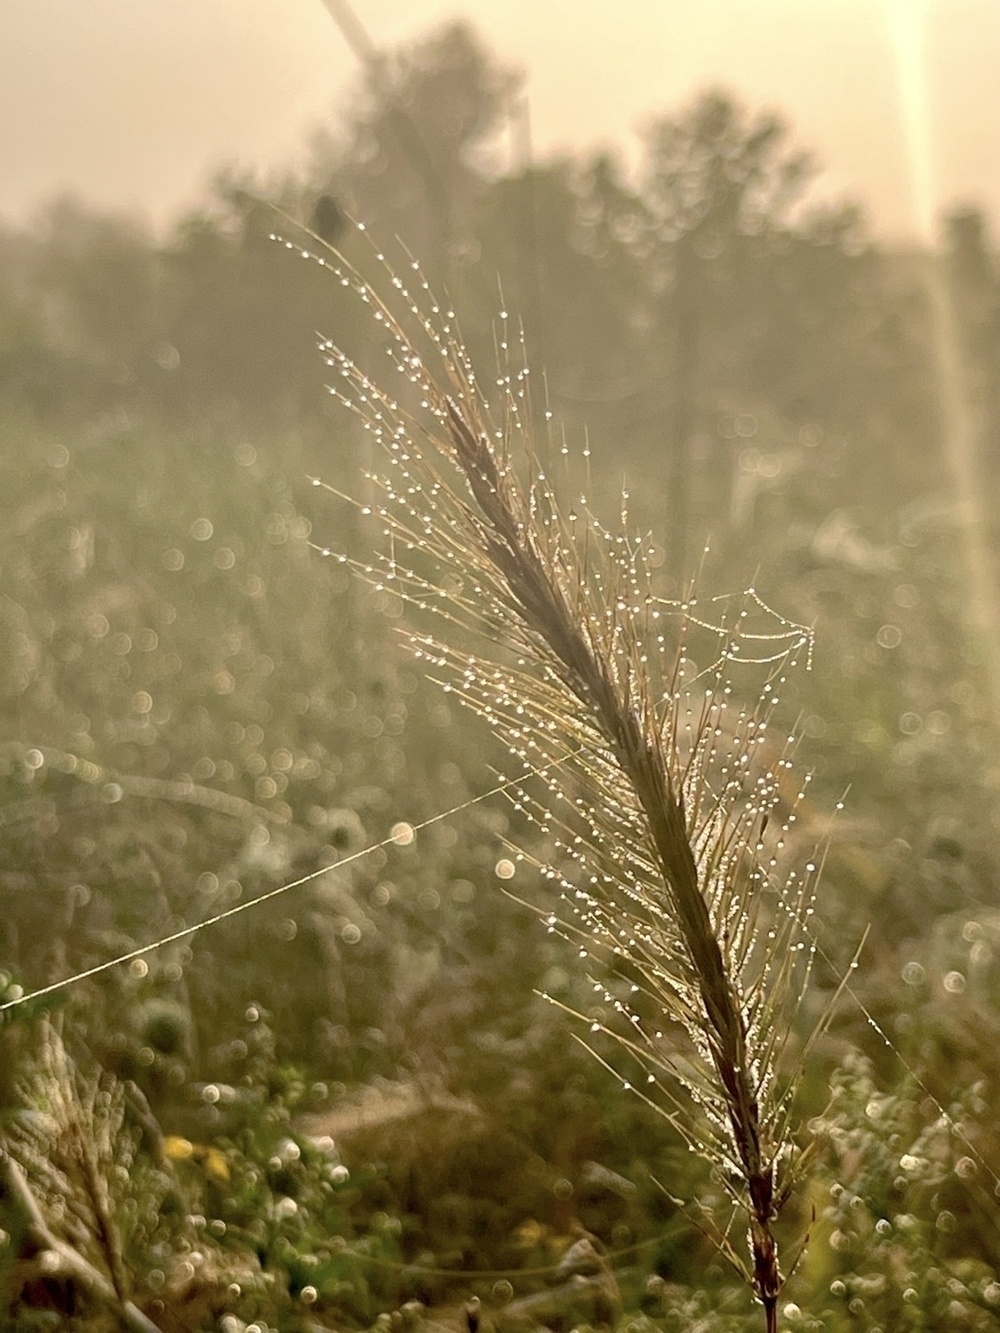 A dew covered seed head in a field of grasses and flowers is lit by golden morning sun